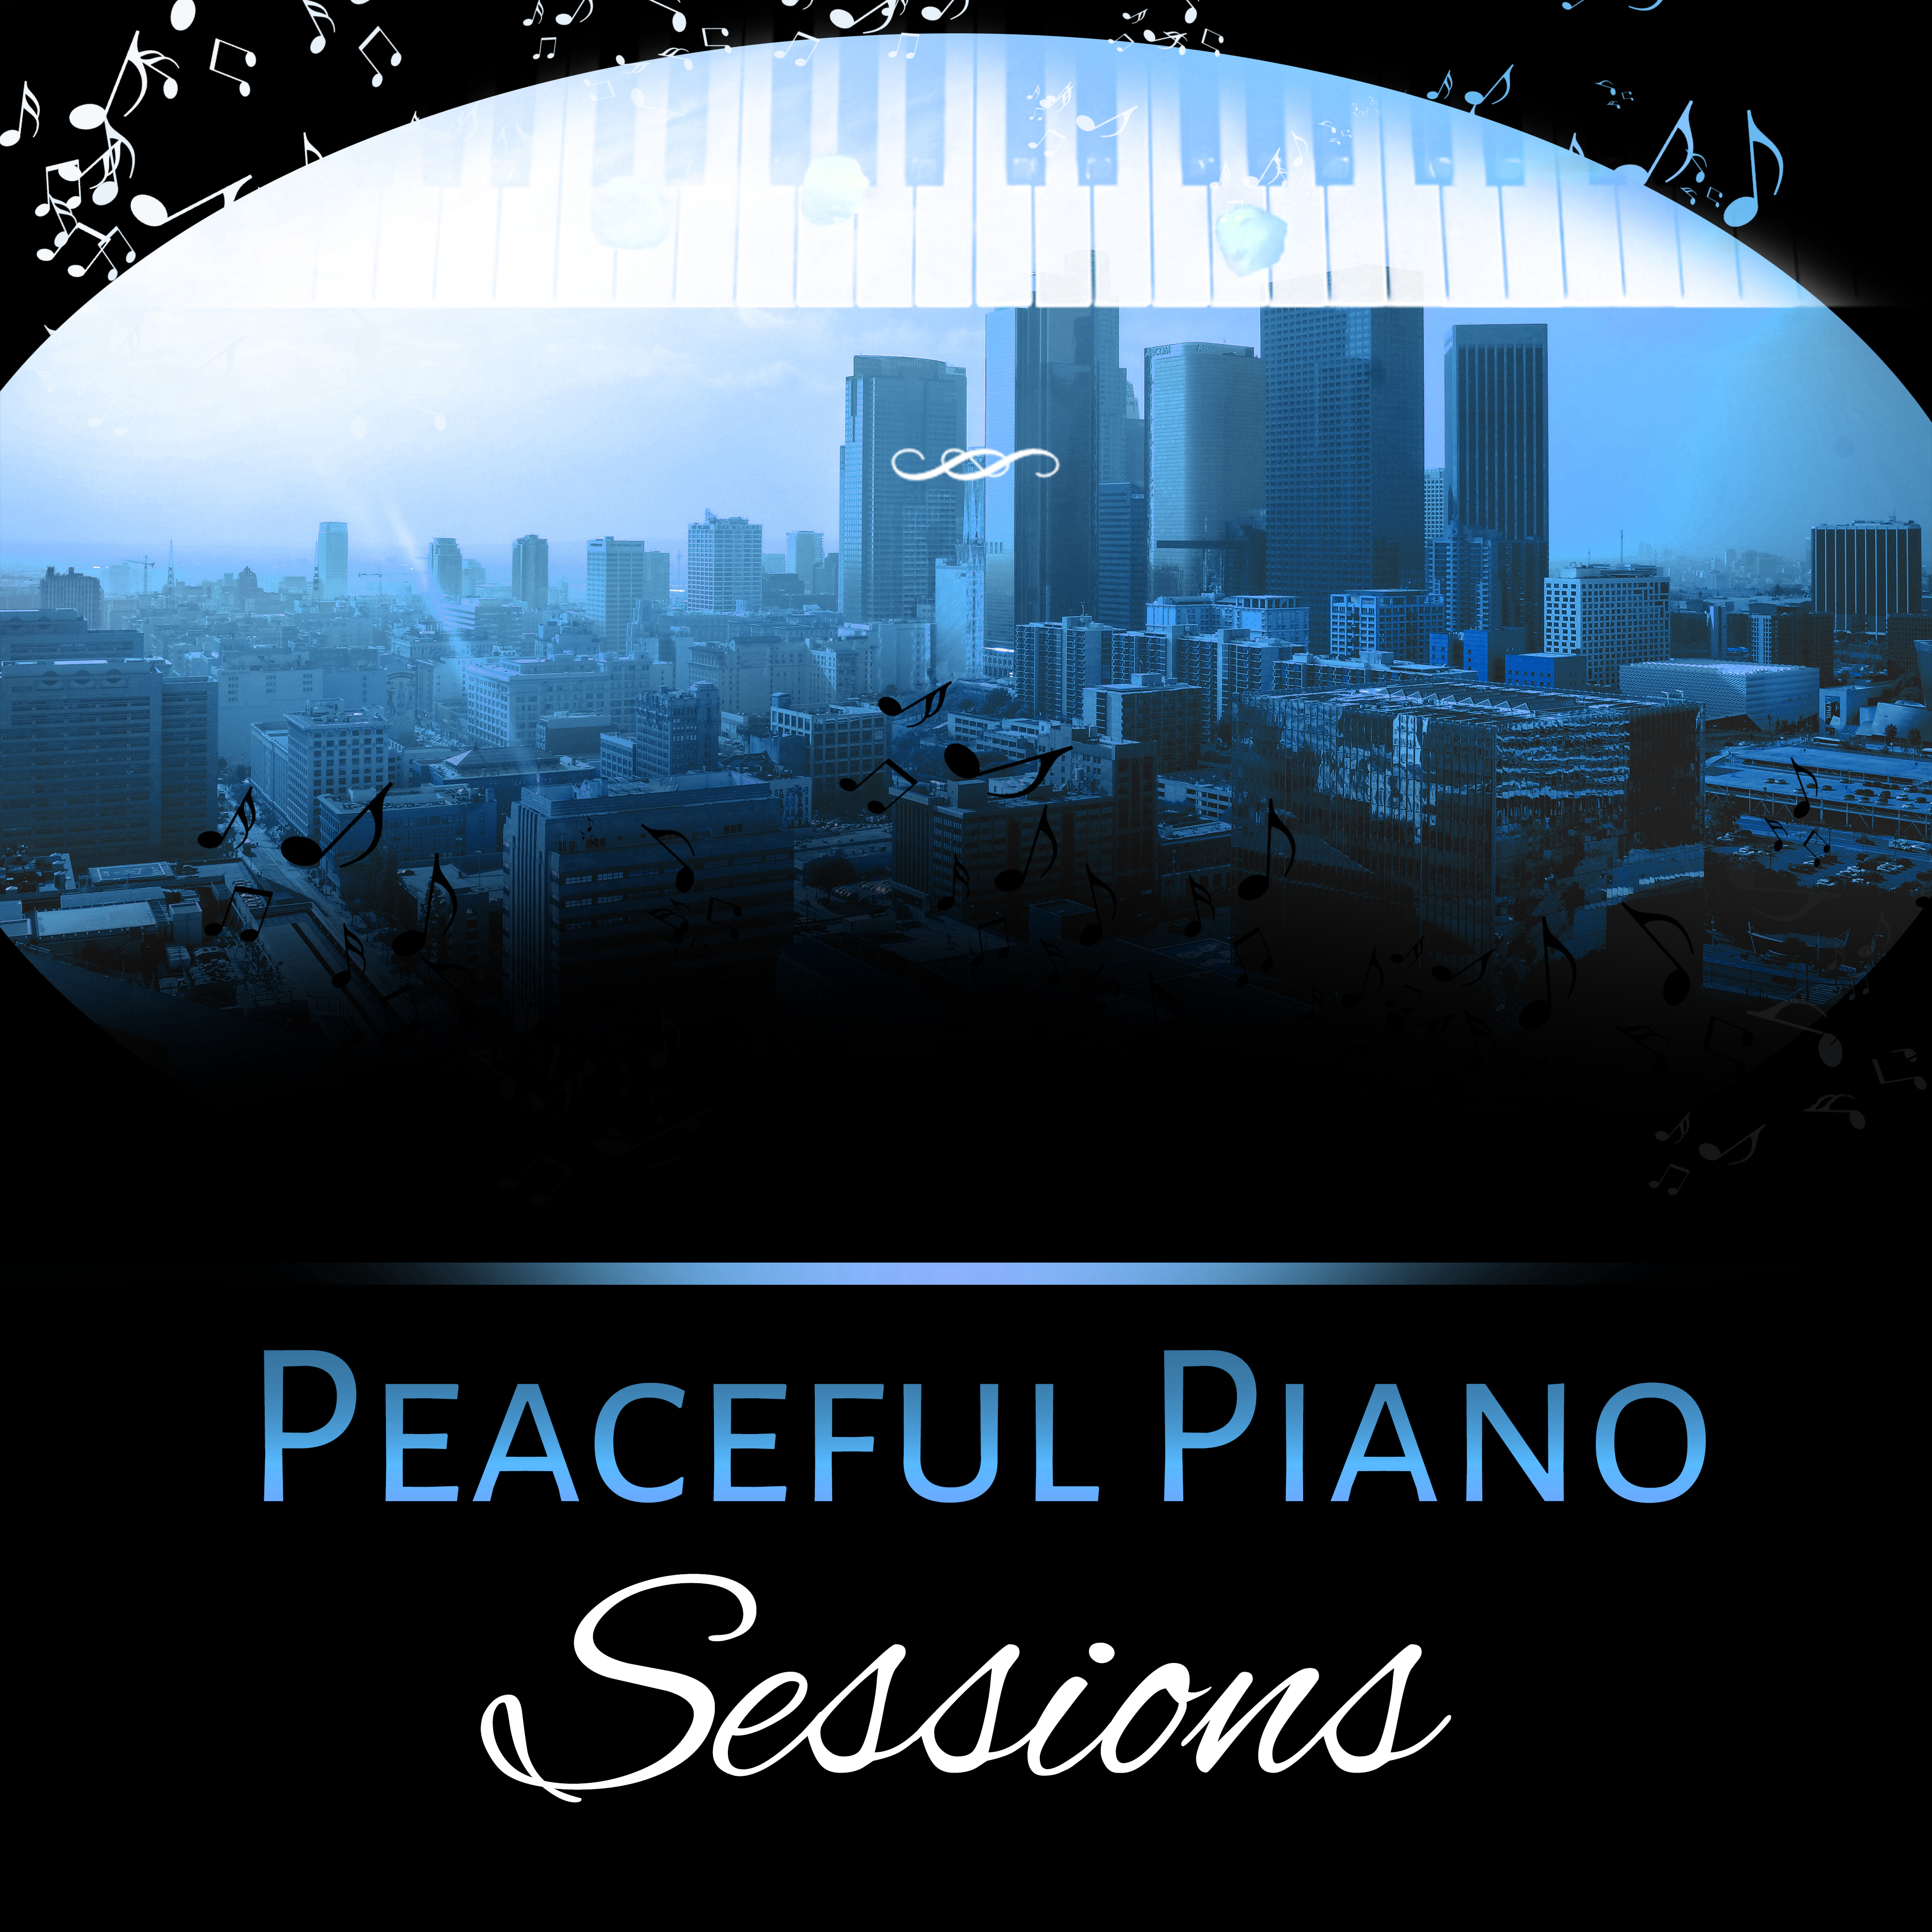 Peaceful Piano Sessions  Instrumental Piano Melodies, Mellow Jazz, Ambient Zone